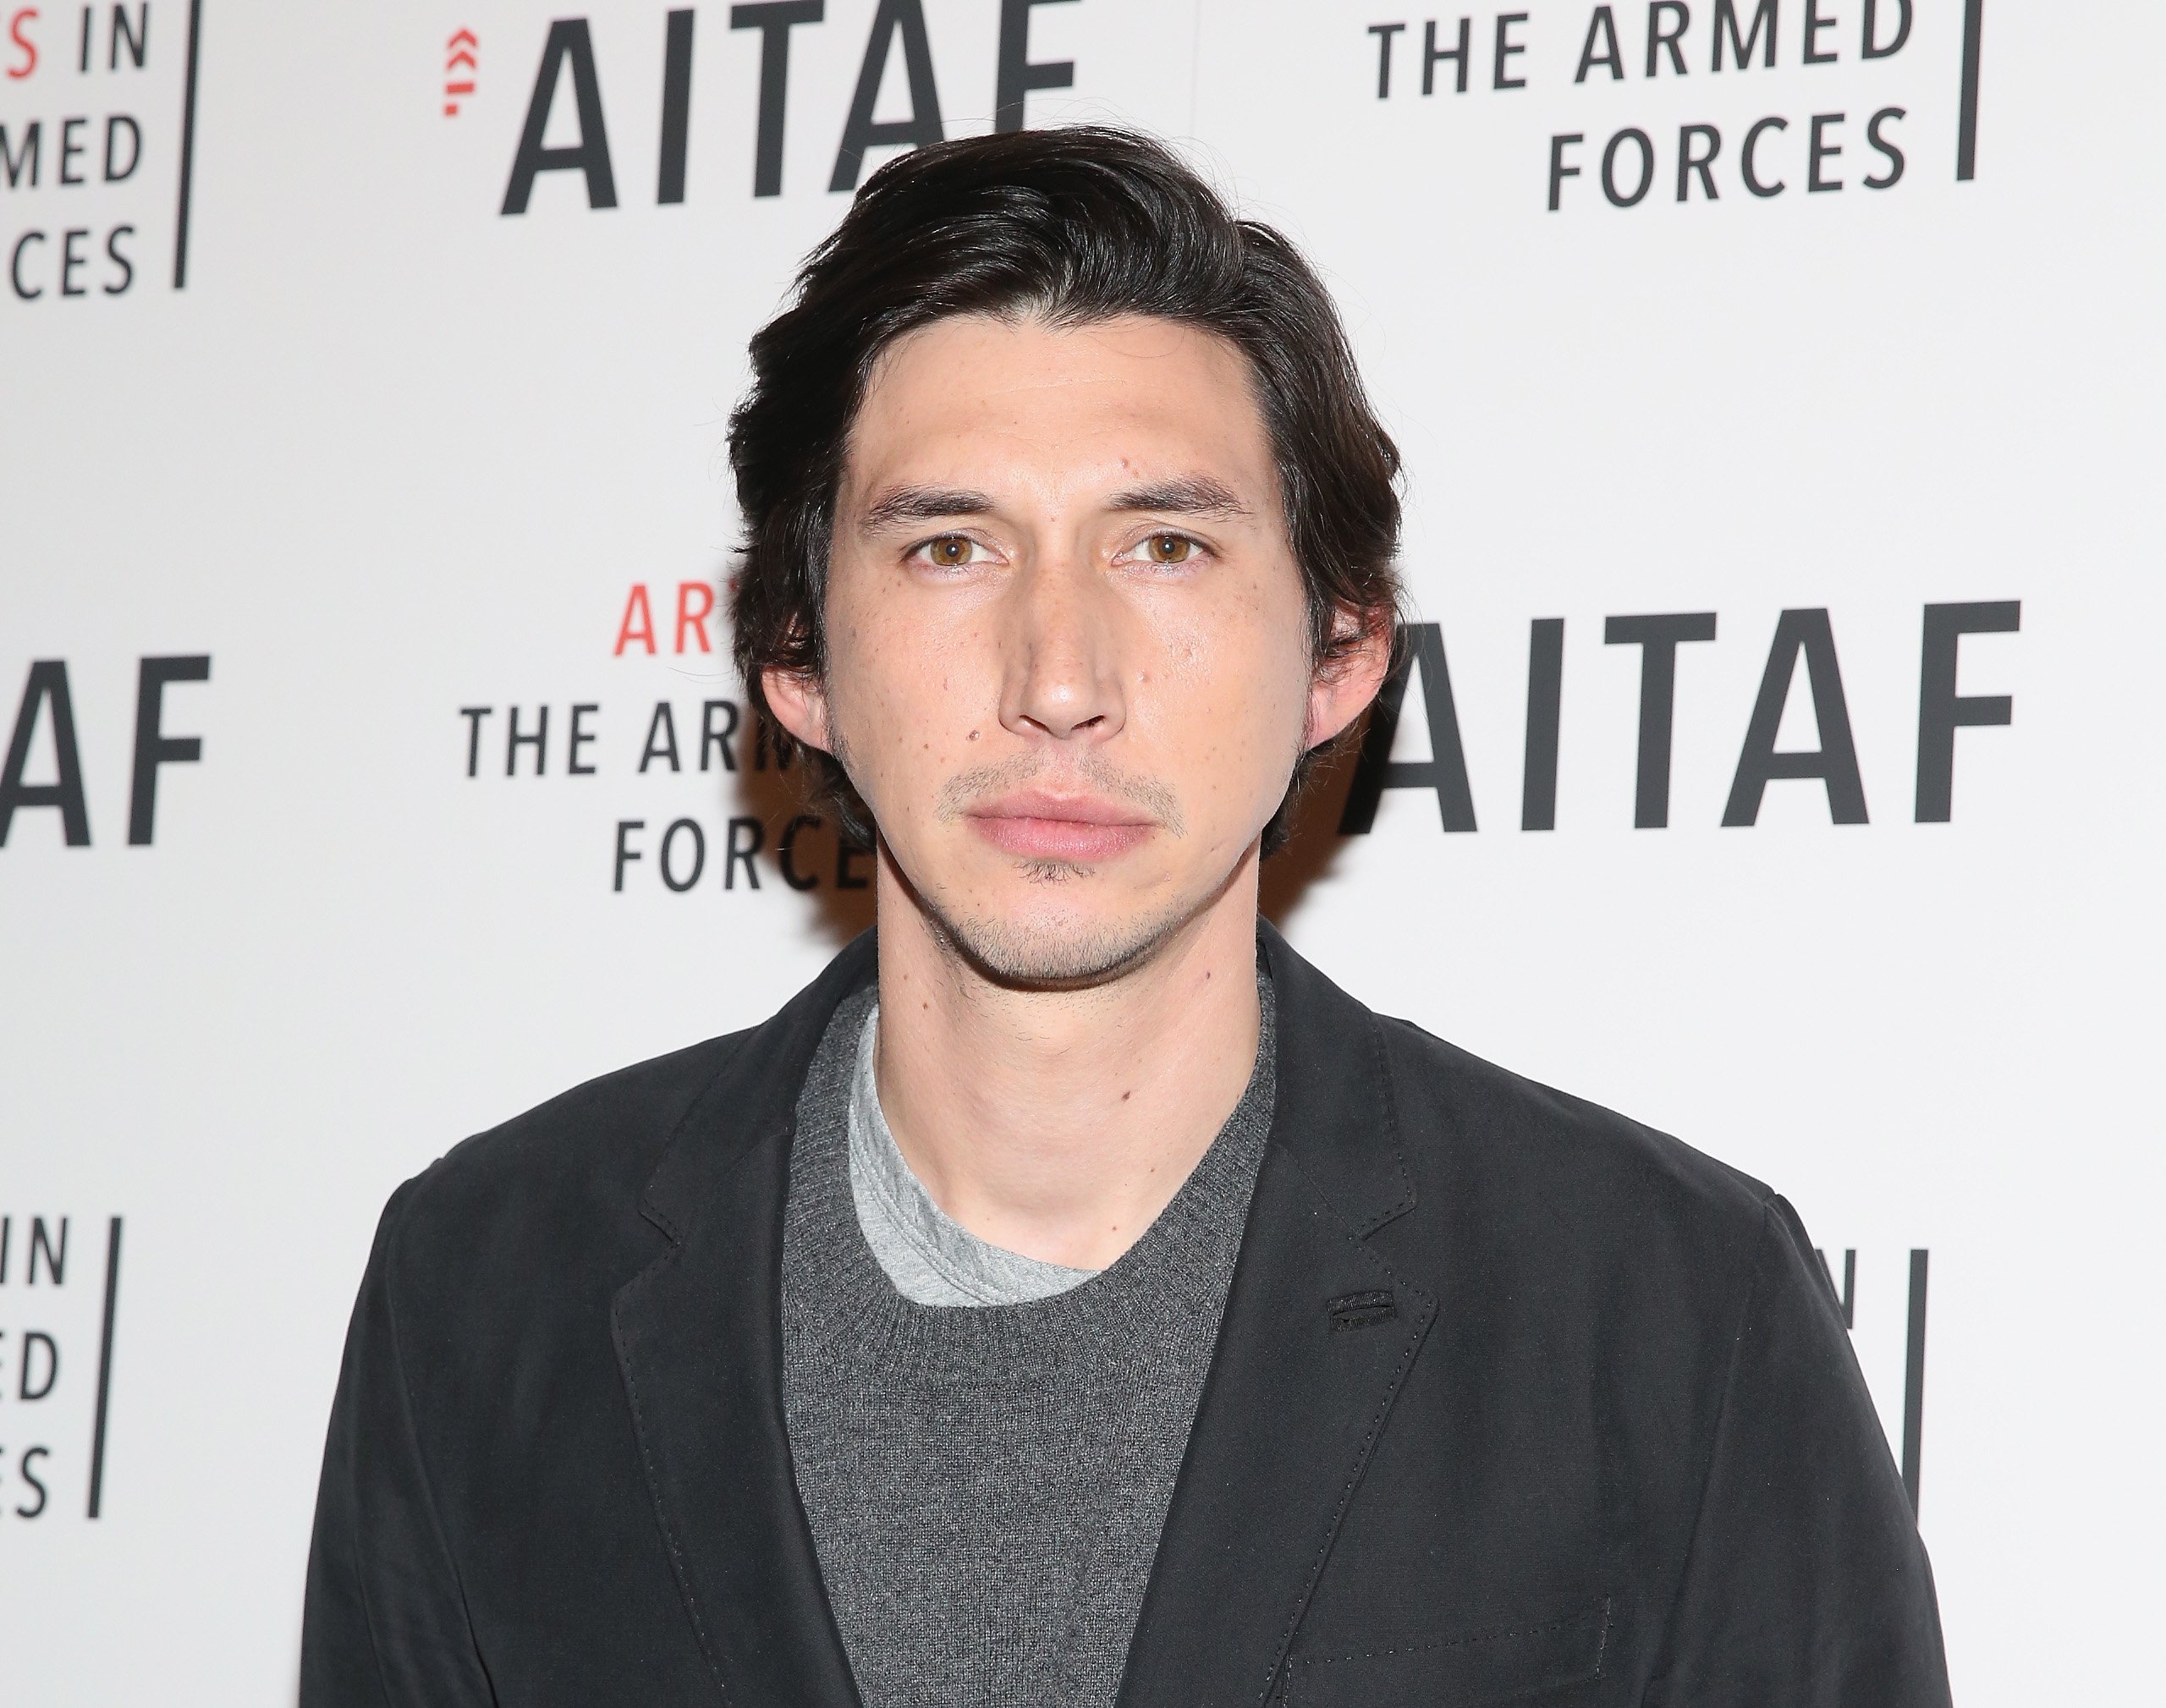 Adam Driver at a photo opportunity. He's looking at the camera, not smiling, wearing a grey sweater and black blazer.